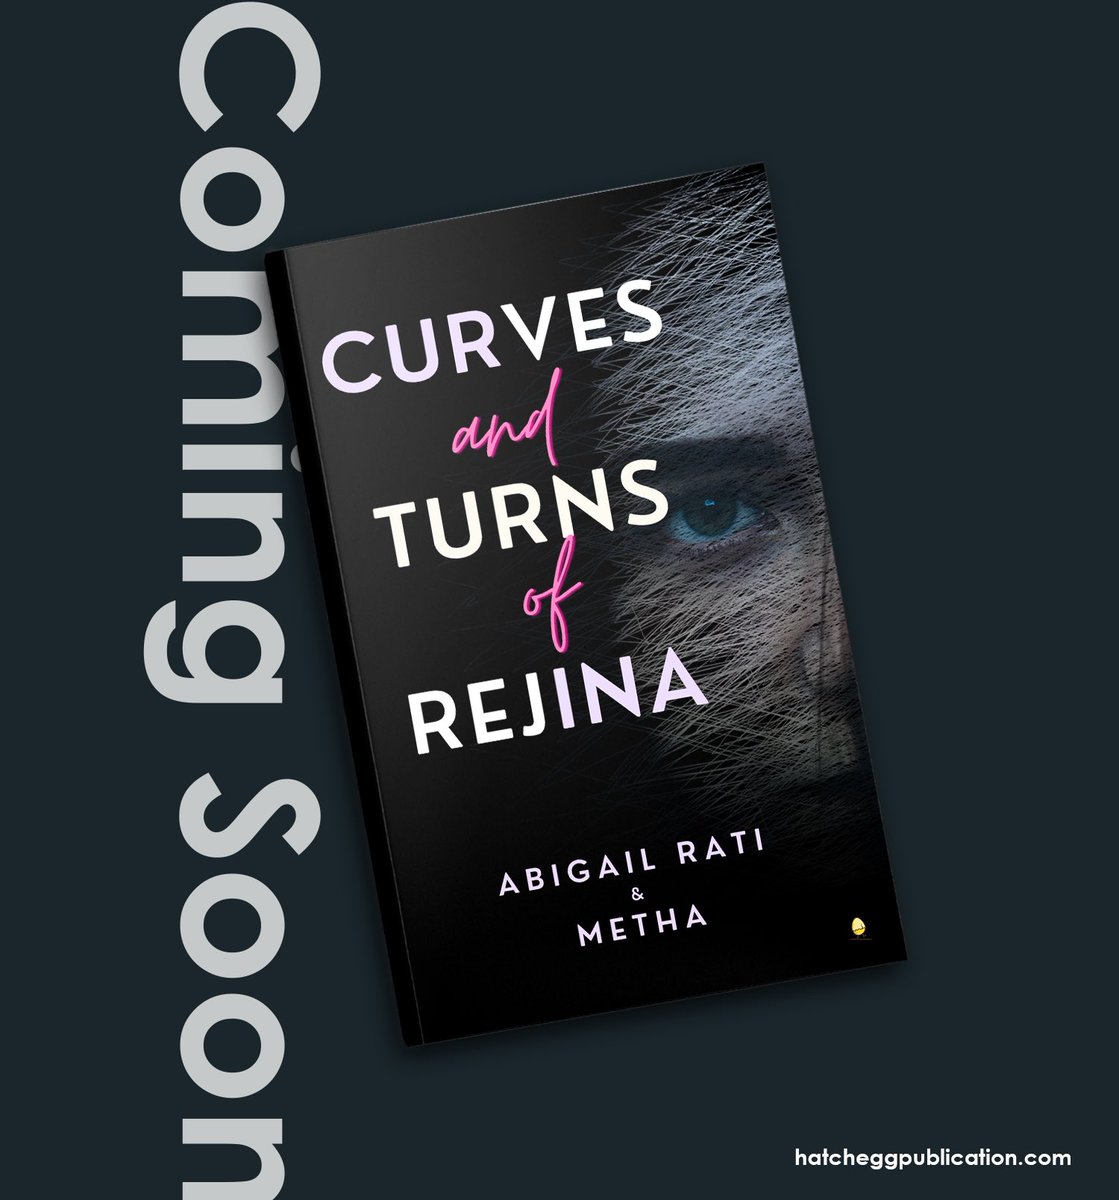 Curves and Turns of Rejina #comingsoon #writersoftwitter #writerslift #poetrylovers #novel #mustread #authorscommunity #BookTwitter #booklovers #BookAddict #poetrytwitter #authorscommunity #writing #yqbaba #yourquote #poetizer #miraquill